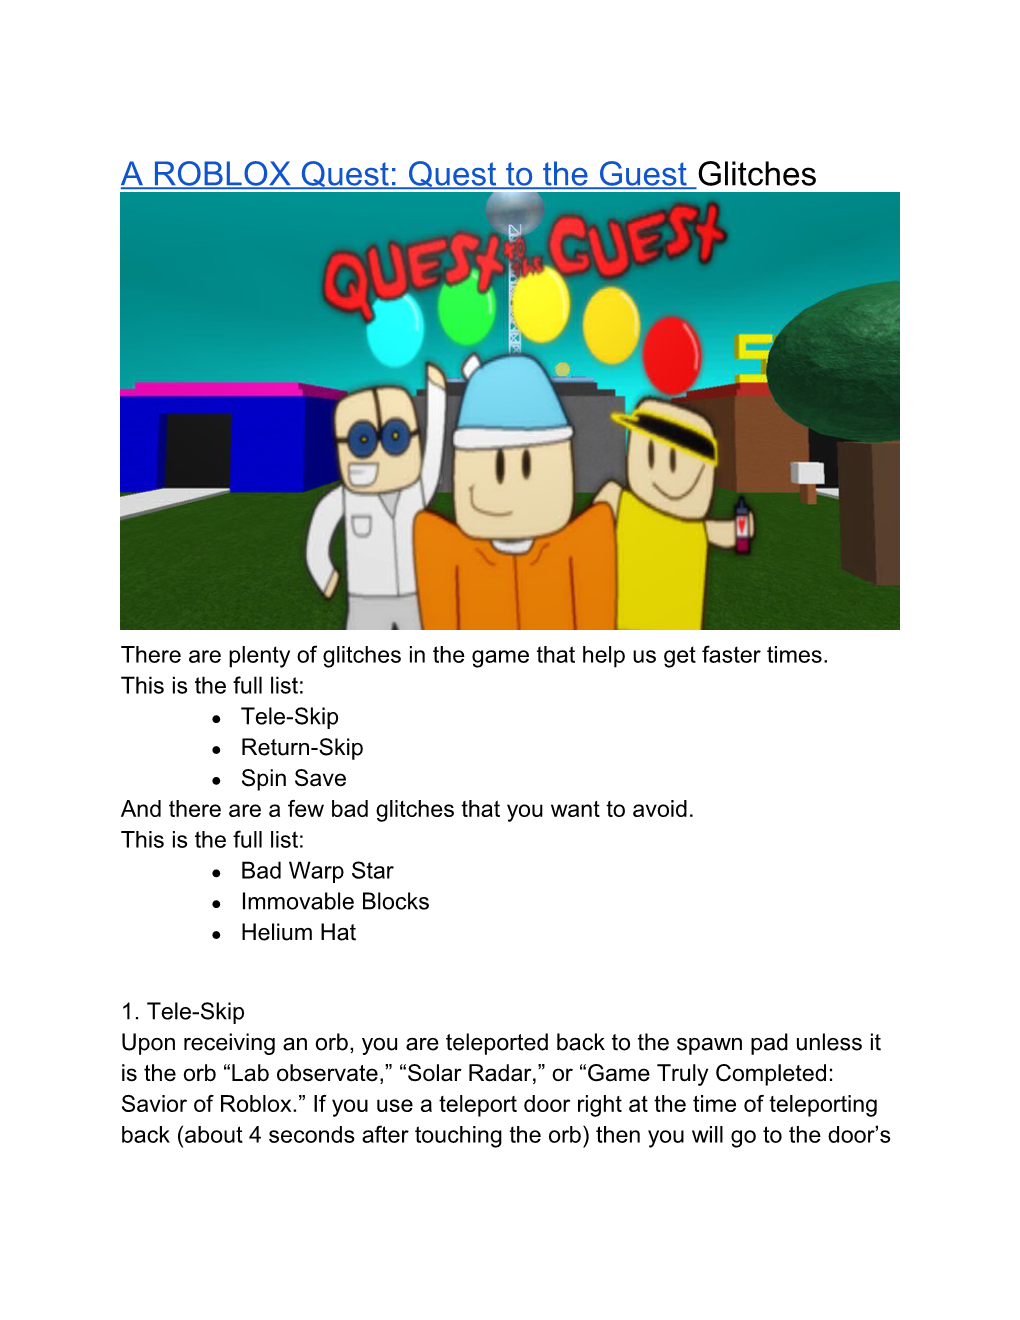 A ROBLOX Quest: Quest to the Guest Glitches